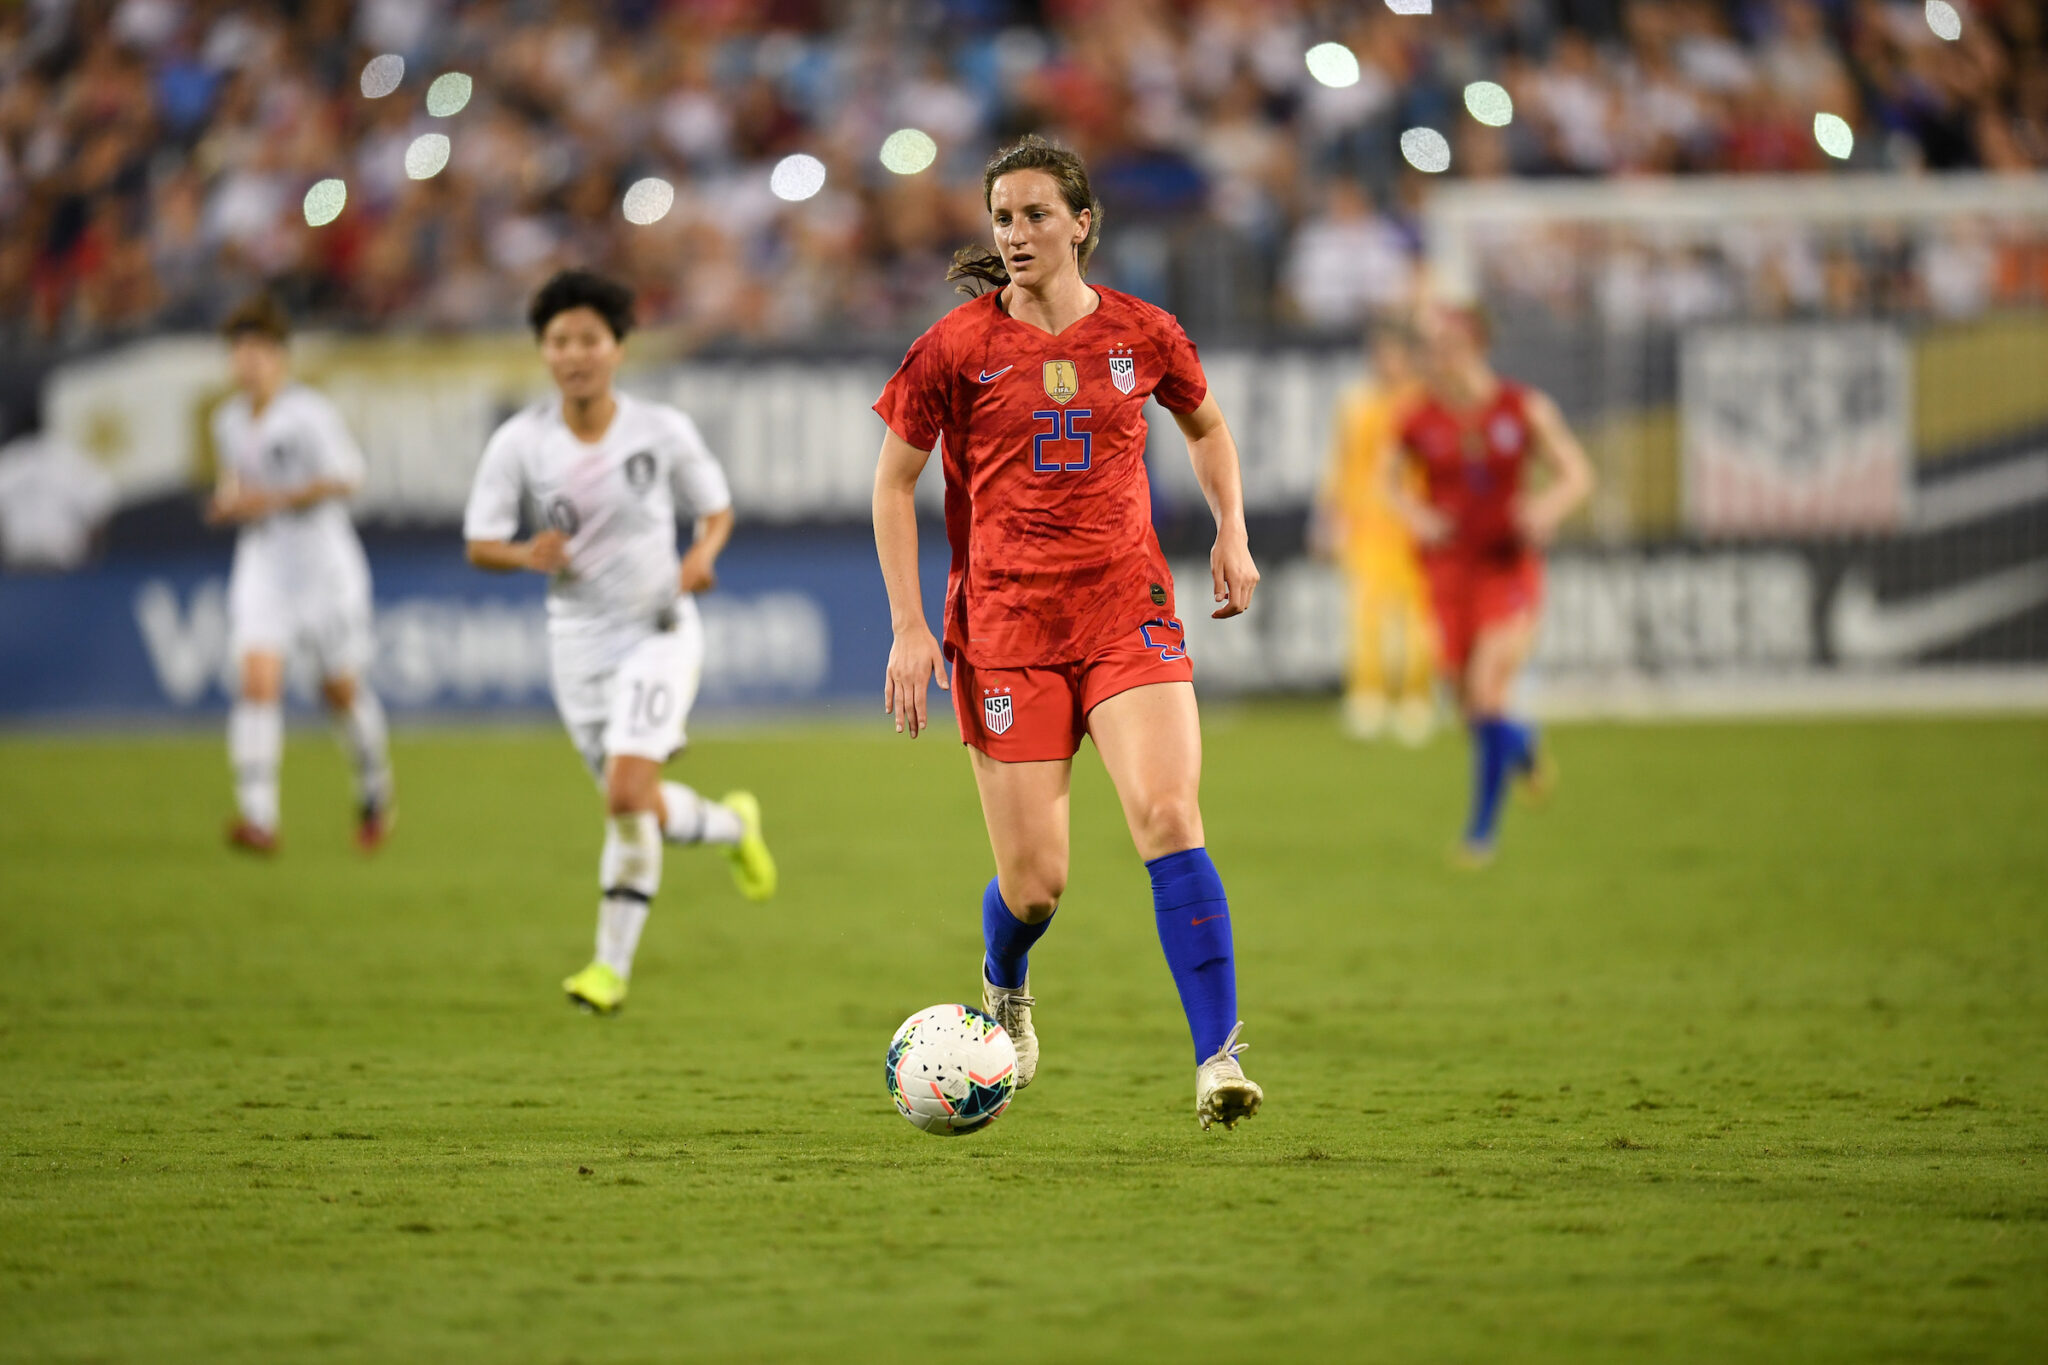 Three Spirit players named to final USWNT Camp before CONCACAF Olympic Qualifying Featured Image